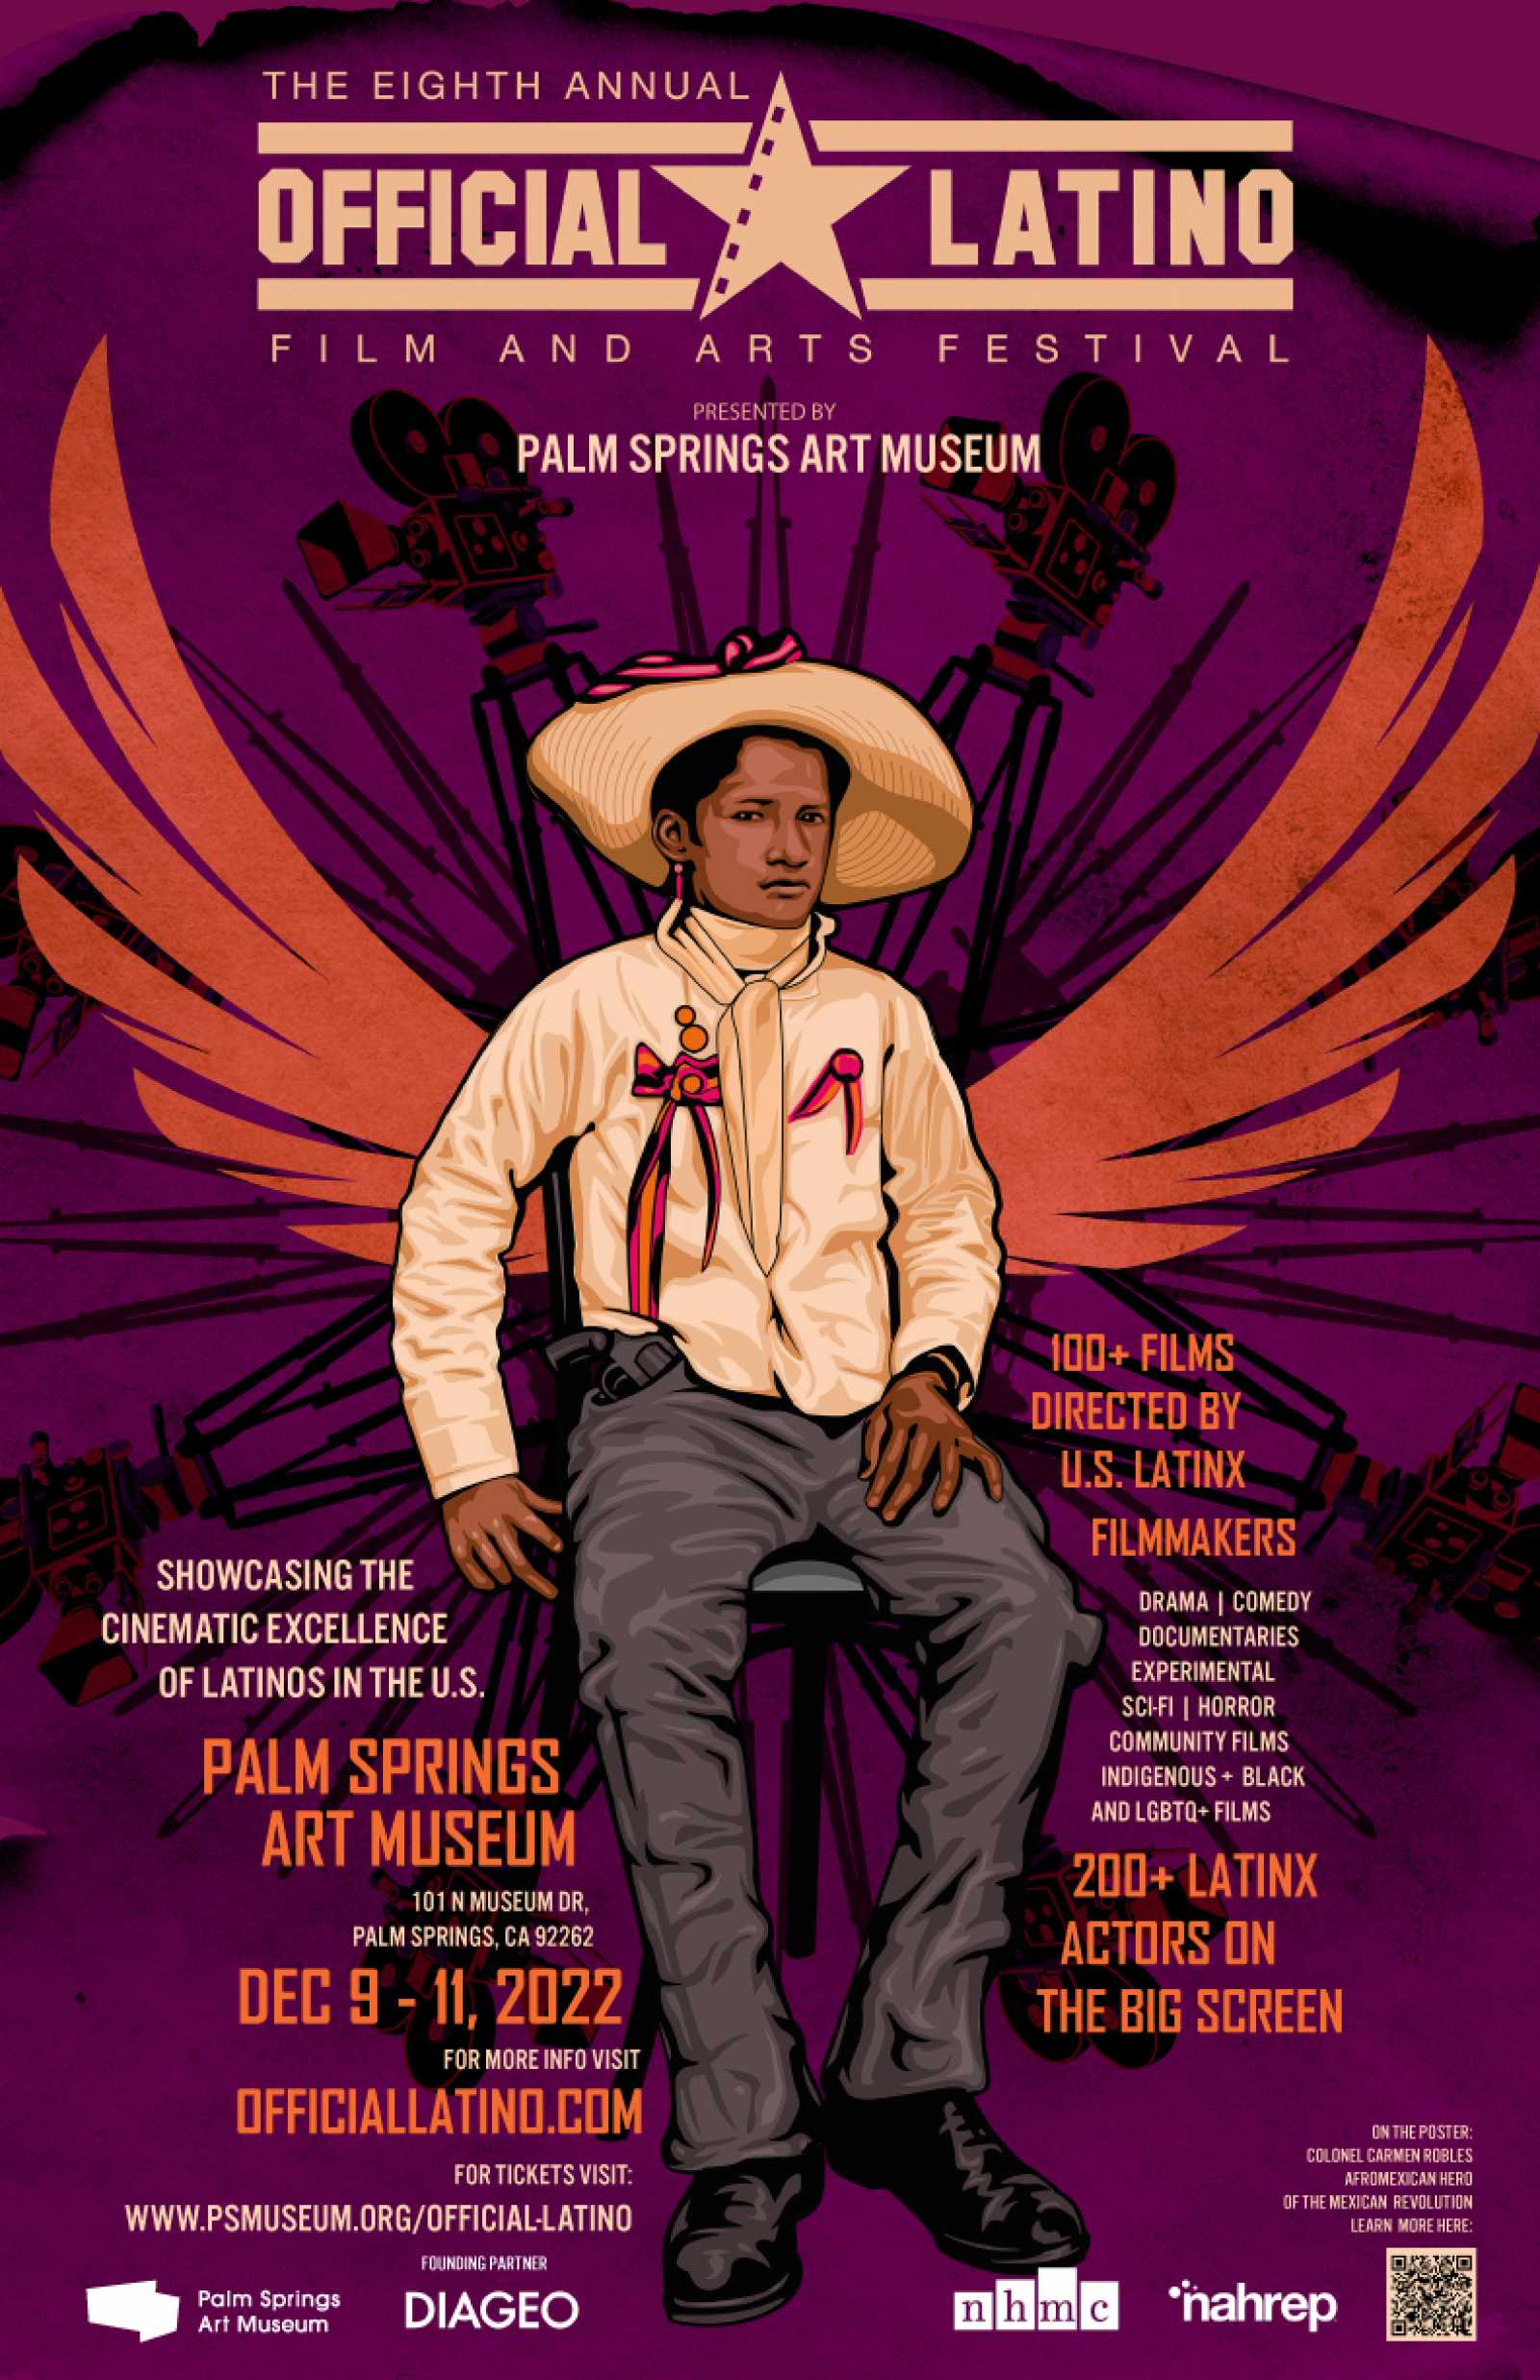 Visit The Palm Springs Art Museum For The Eighth Annual Official Latino